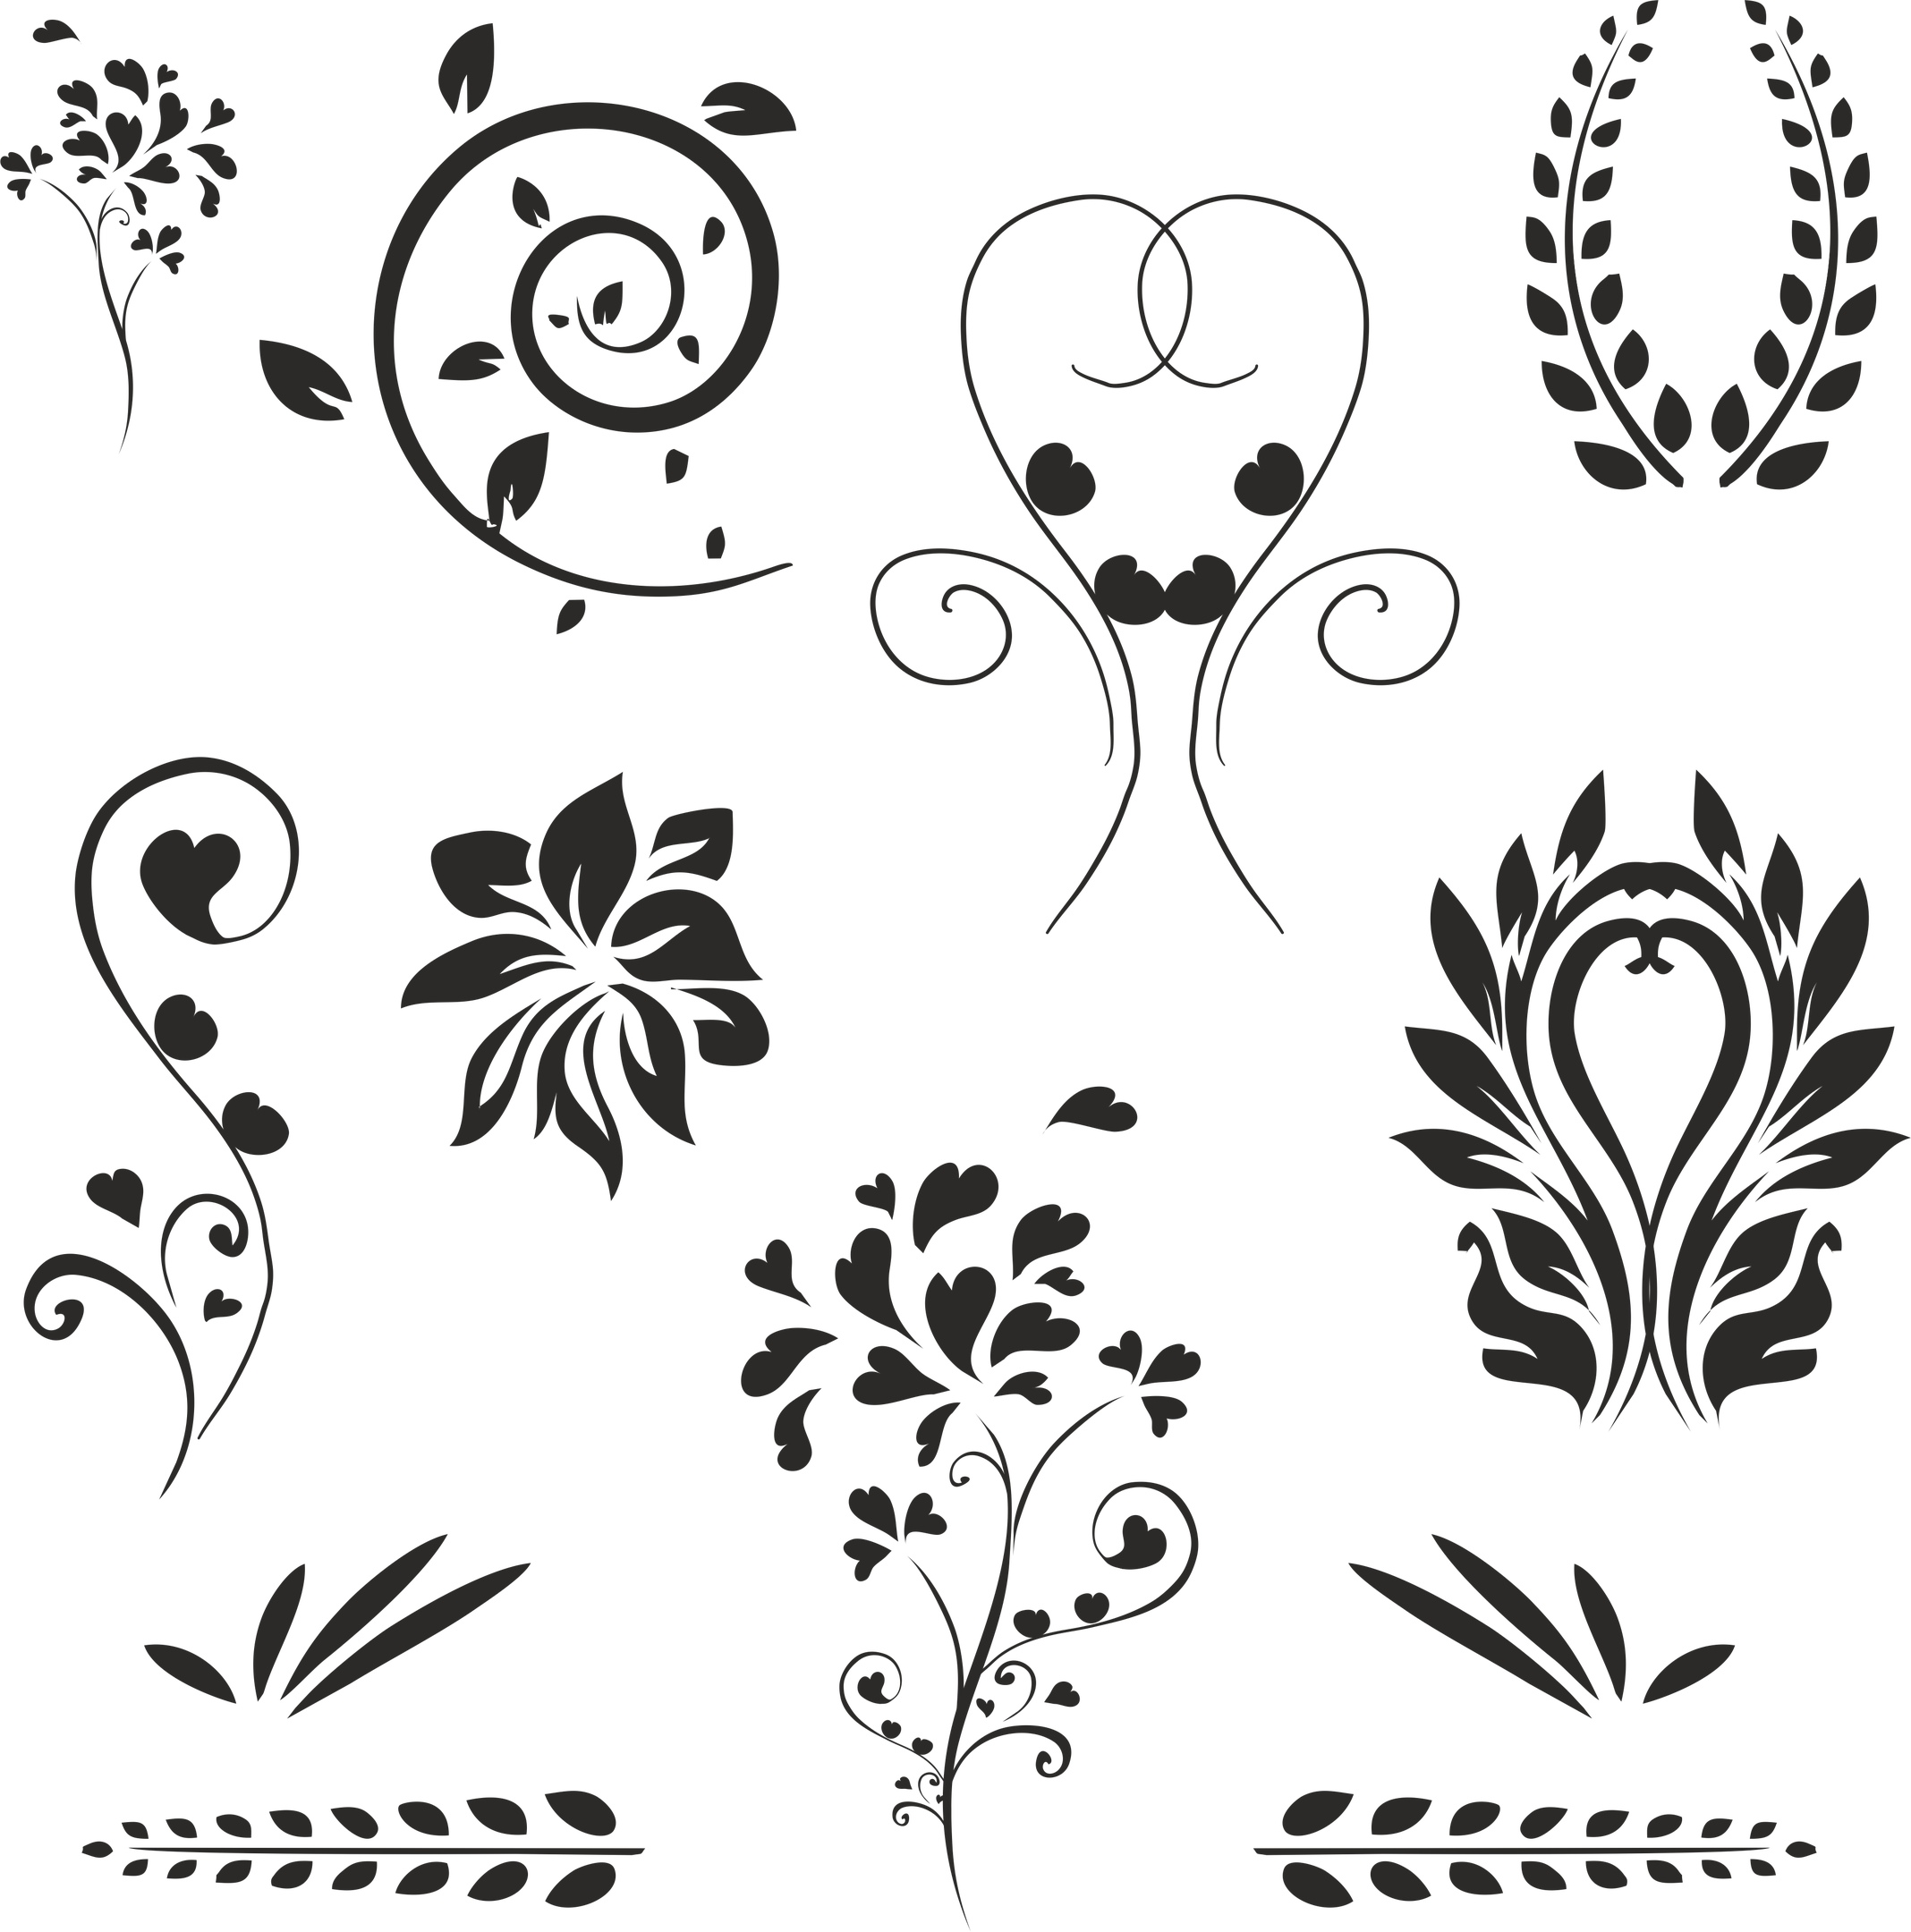 Download Floral Decoration Set Free Vector cdr Download - 3axis.co